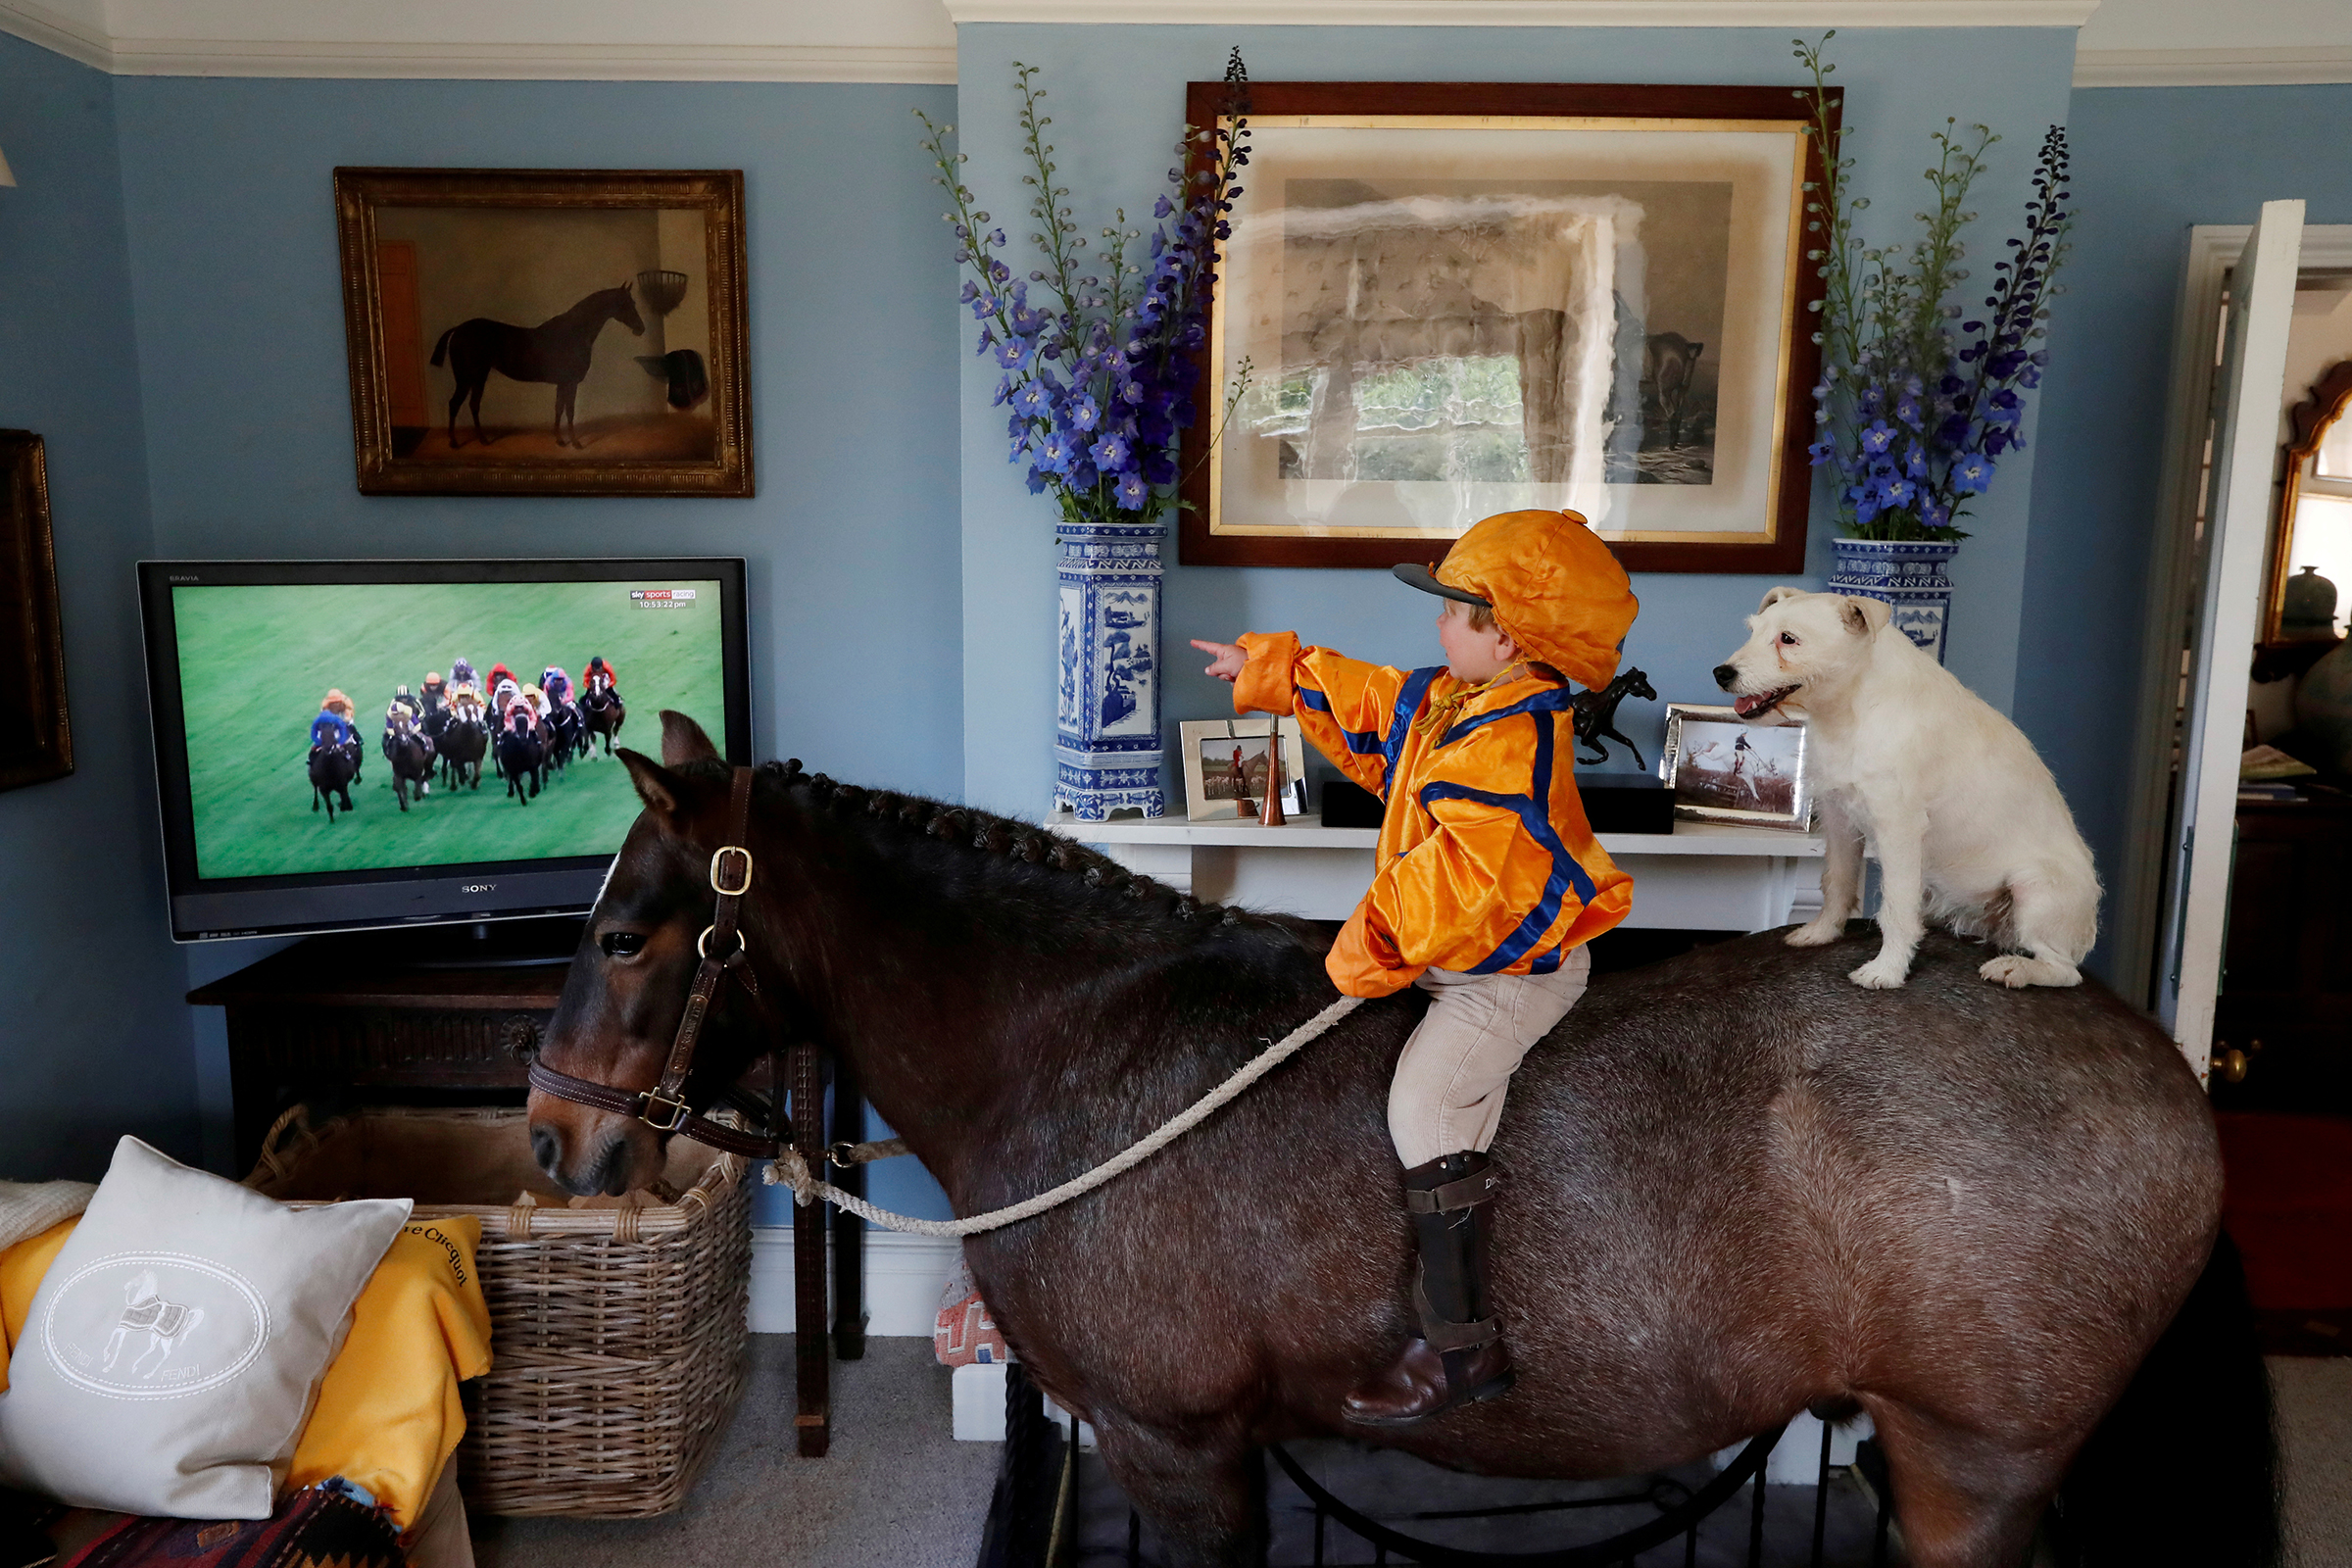 Merlin Coles, 3, watches horse racing at Royal Ascot from his home in Bere Regis, Britain, on June 17, 2020. Coles is sitting on his horse, Mr. Glitter Sparkles, with his dog, Mistress, as racing resumed behind closed doors.